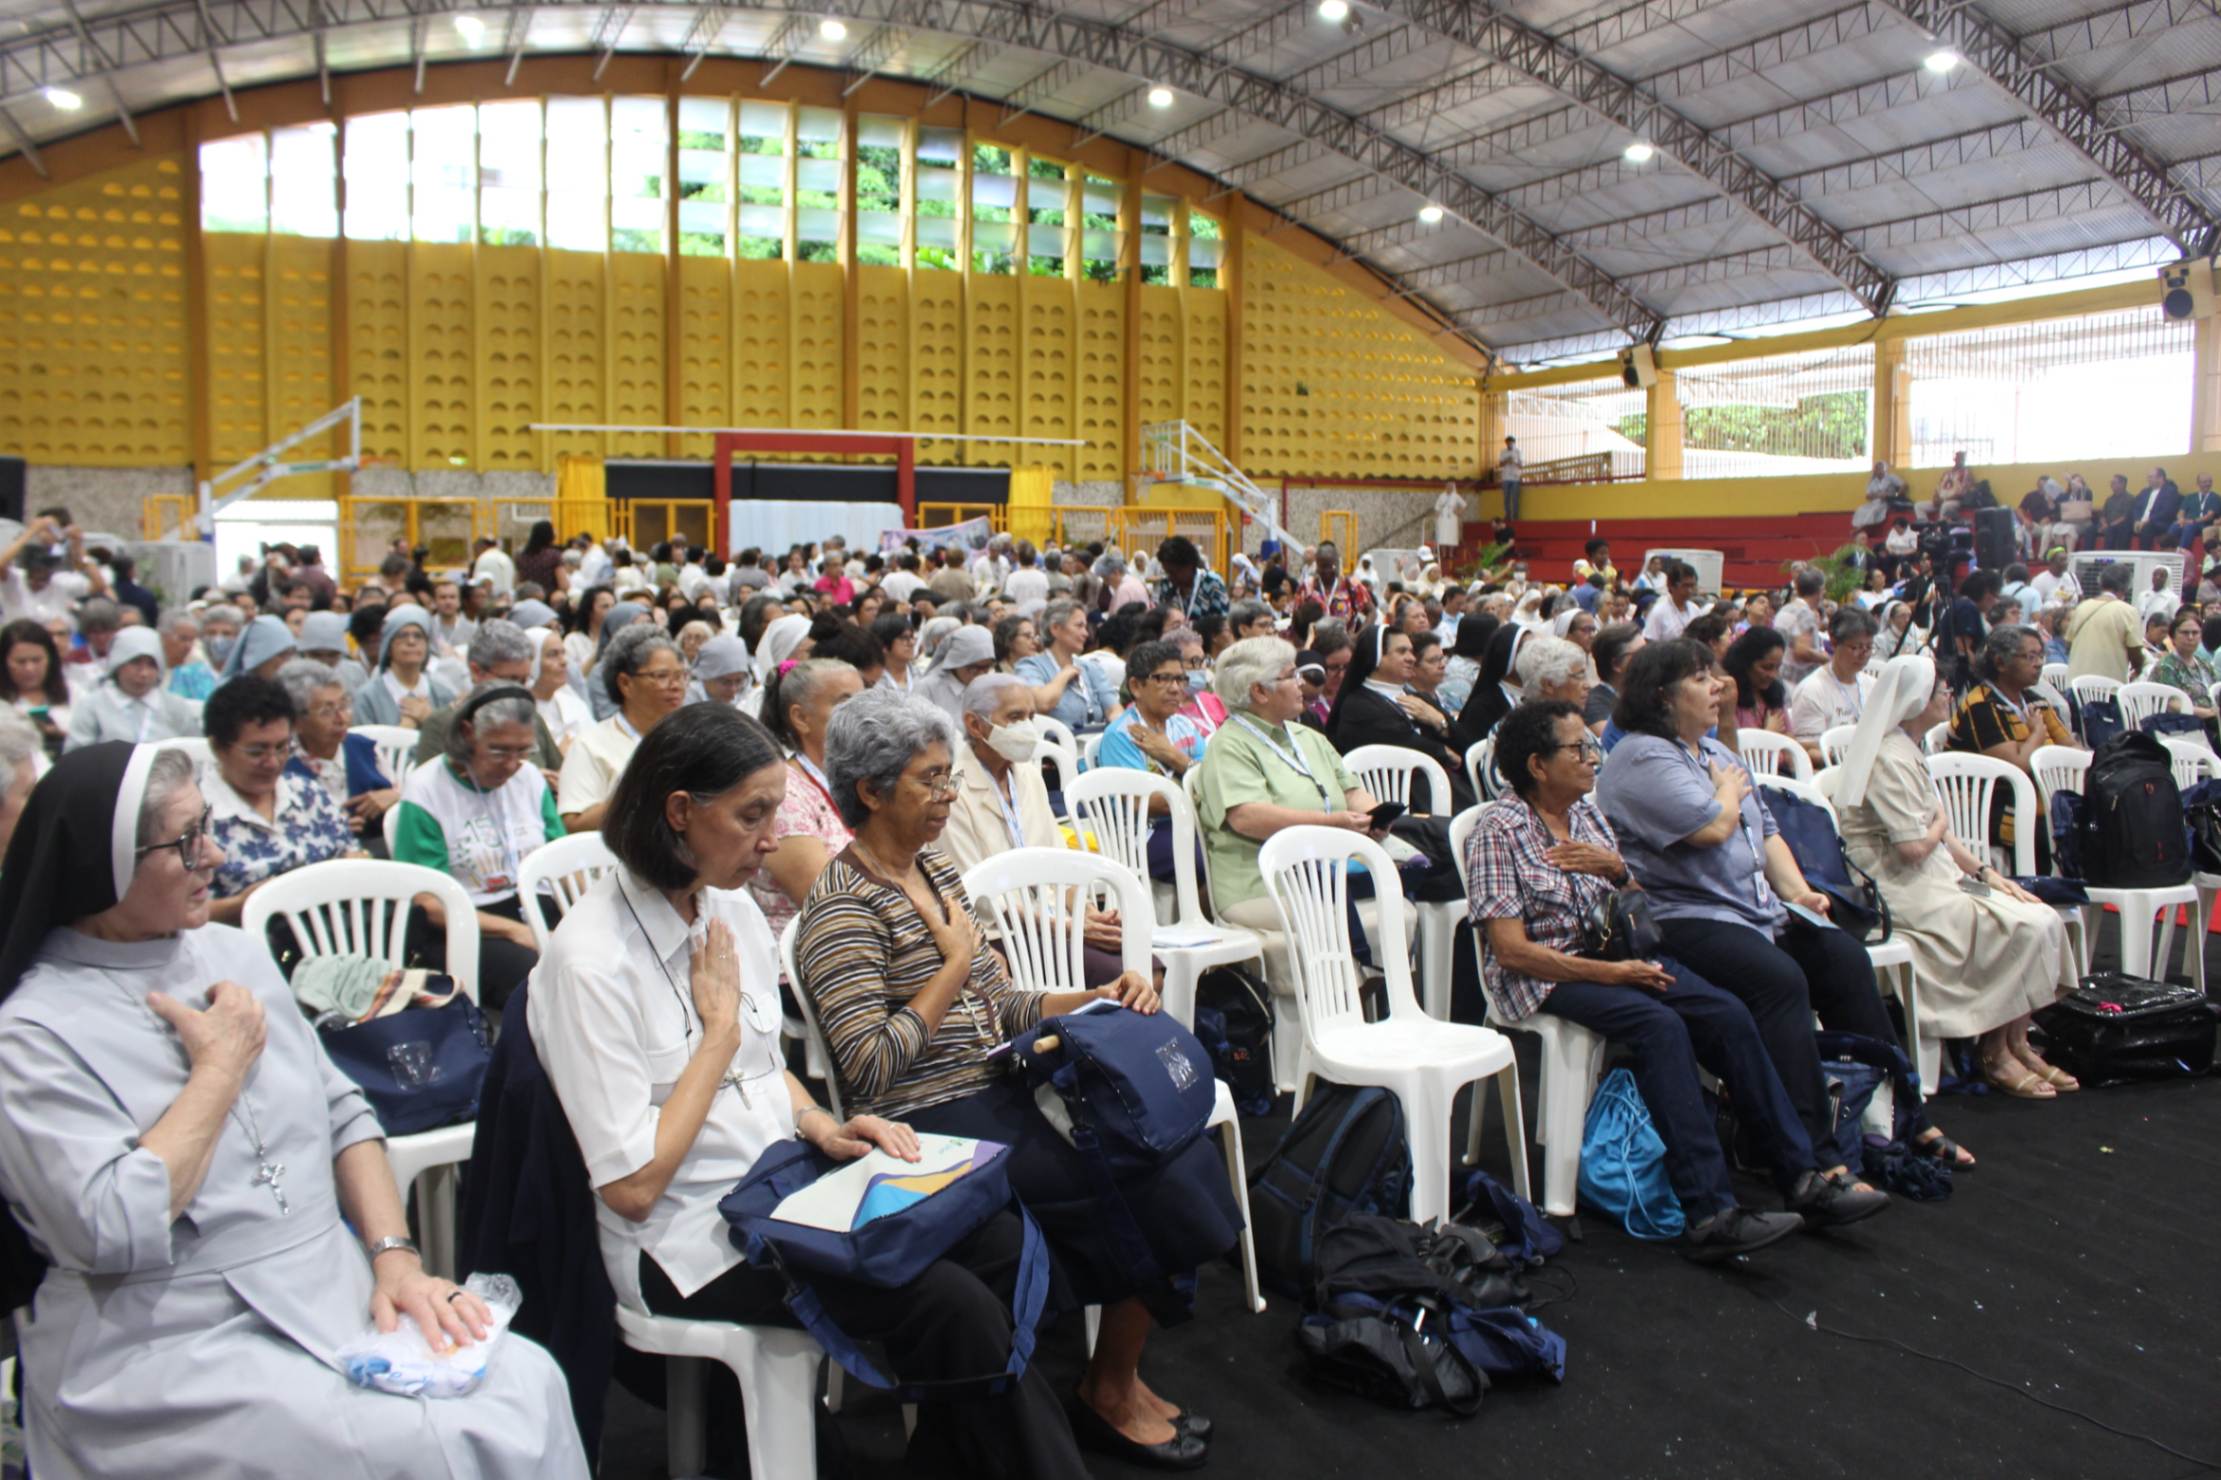 Participants celebrating 70 years of the Confederation of Religious in Brazil, held May 30-June 2 in Fortaleza, Ceara. (Courtesy of CRB)